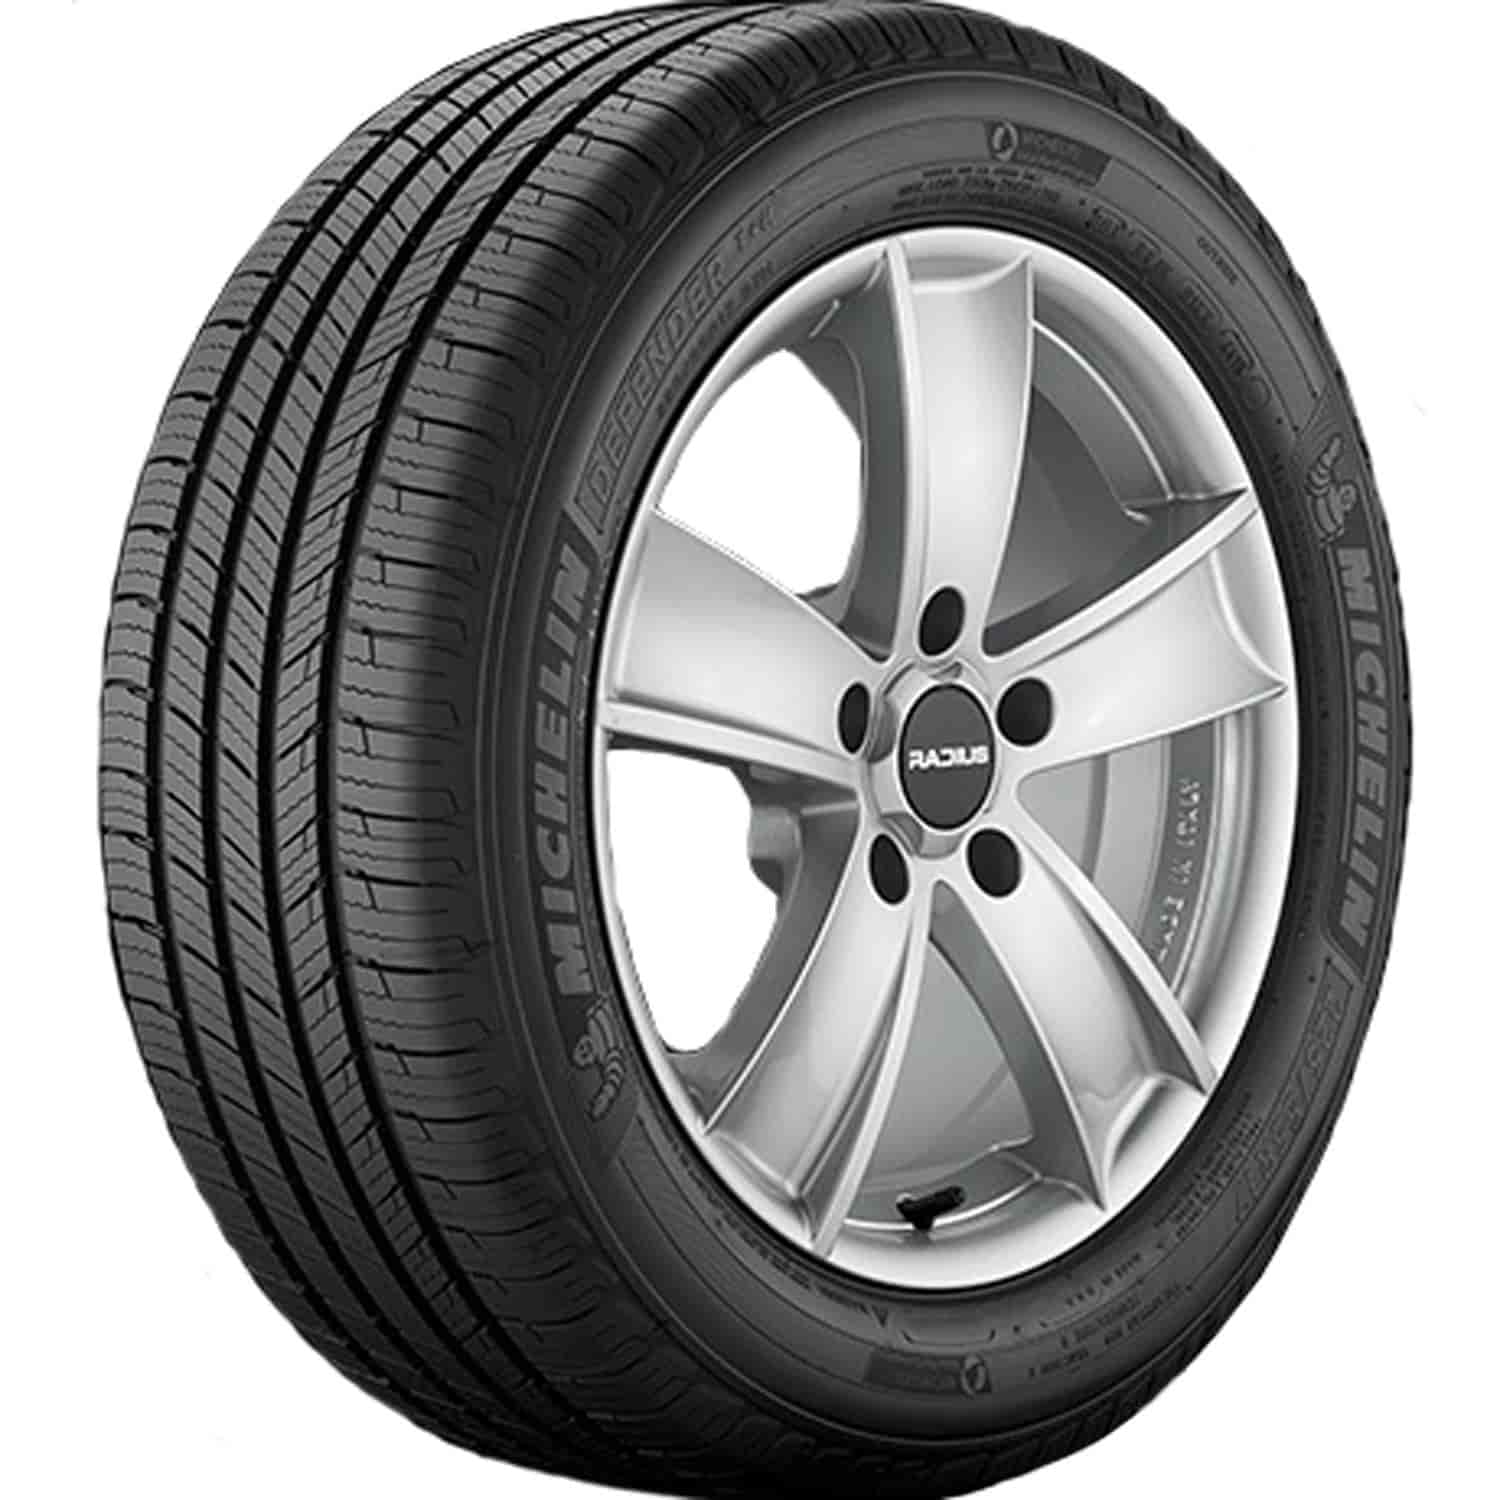 Defender T+H Tire Size:235/60R16